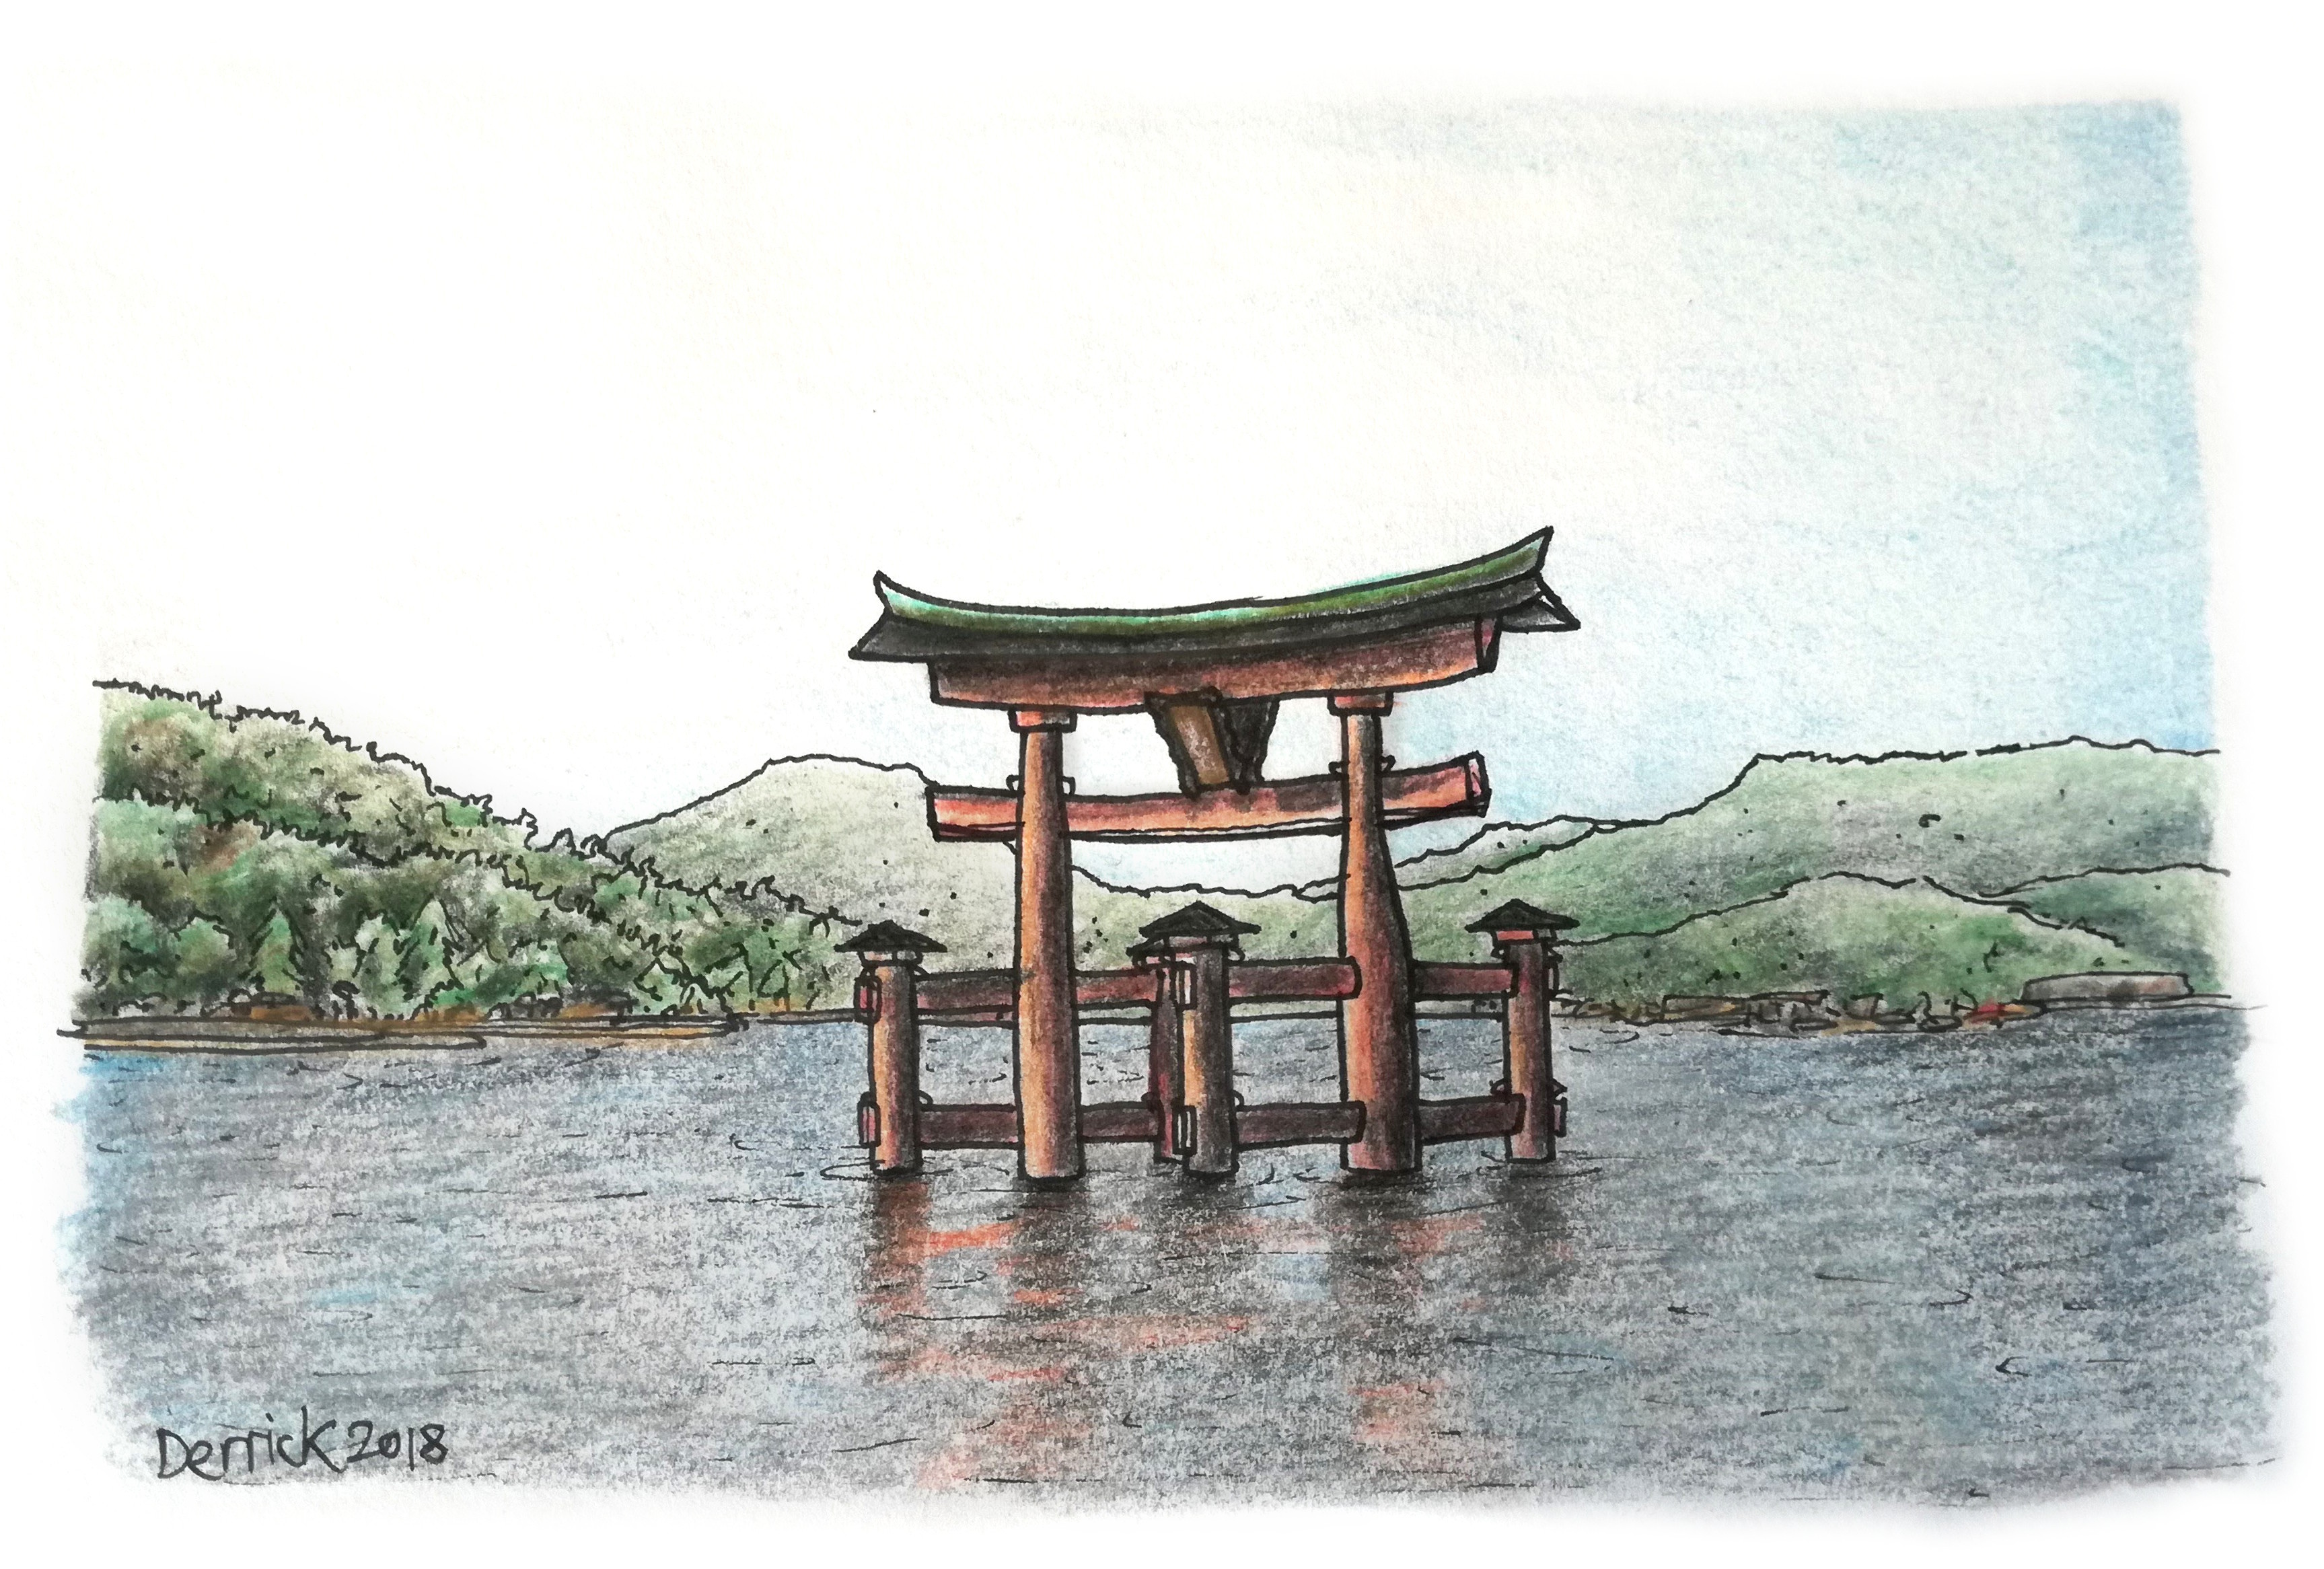 Sketch of an ancient Japanese torii gate standing in the bay